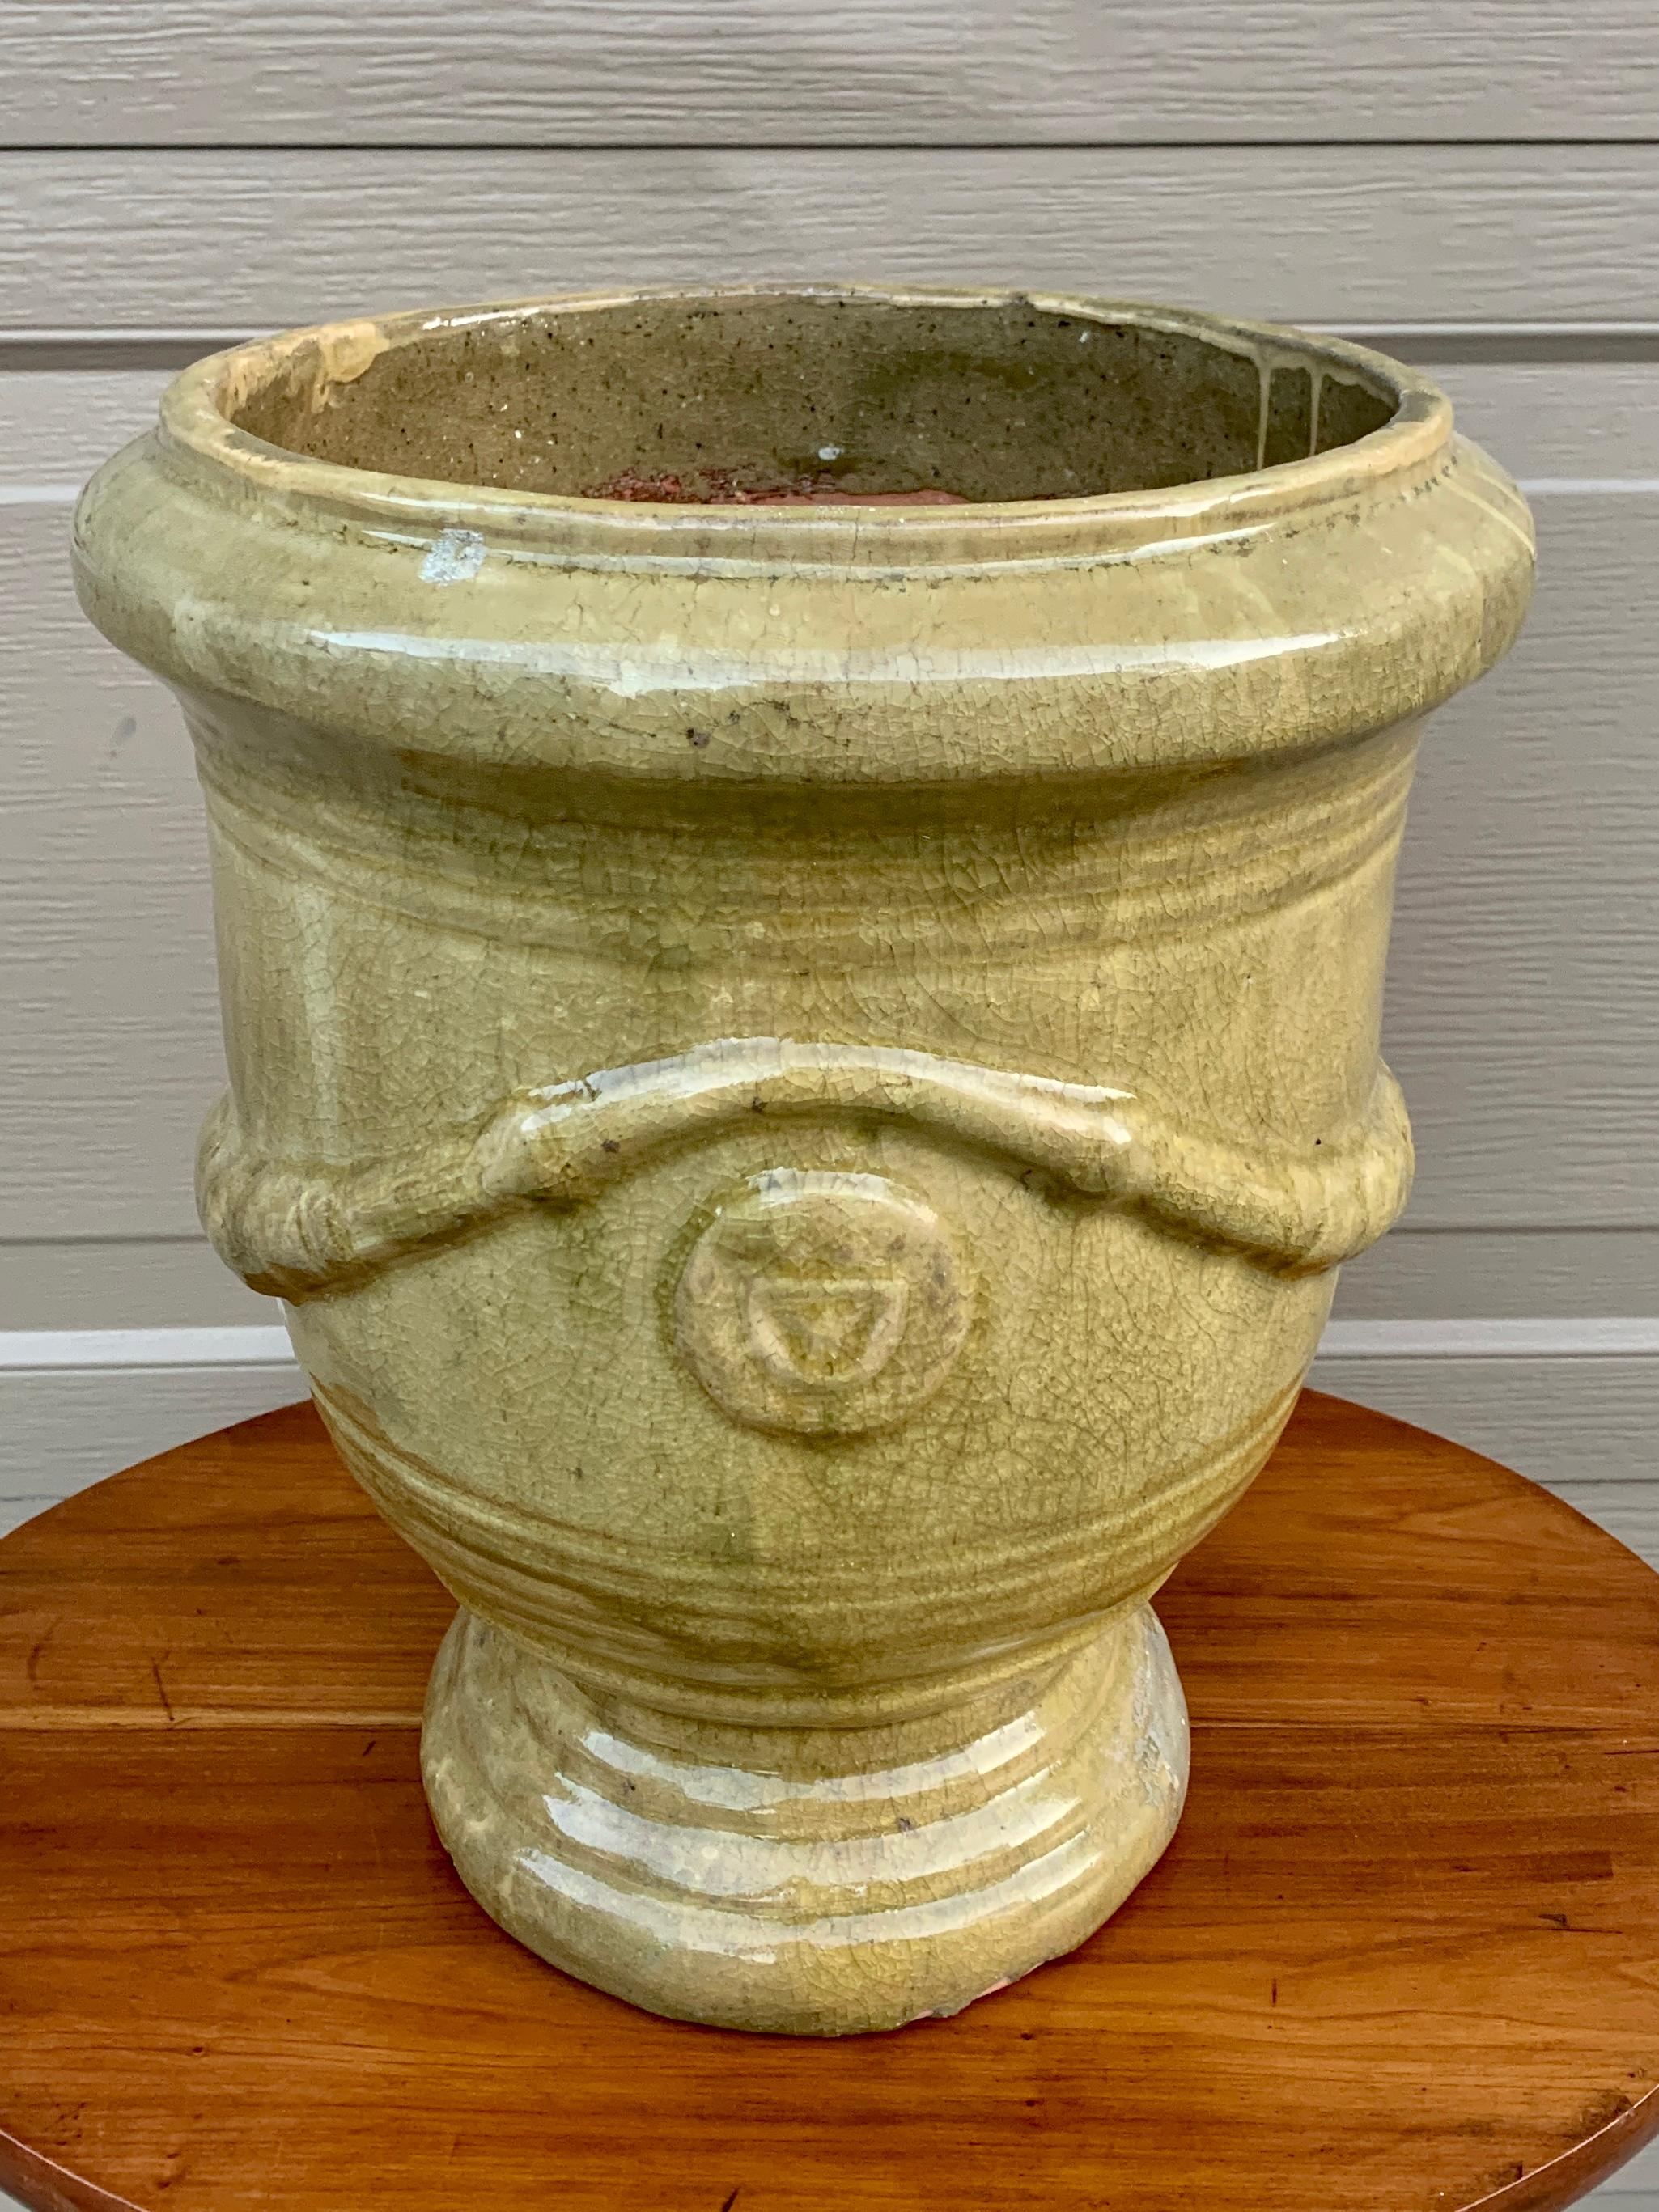 A gorgeous French Provincial planter or garden pot

France, Late-20th Century

Hand-made glazed earthenware in a lovely light green color.

Measures: 12